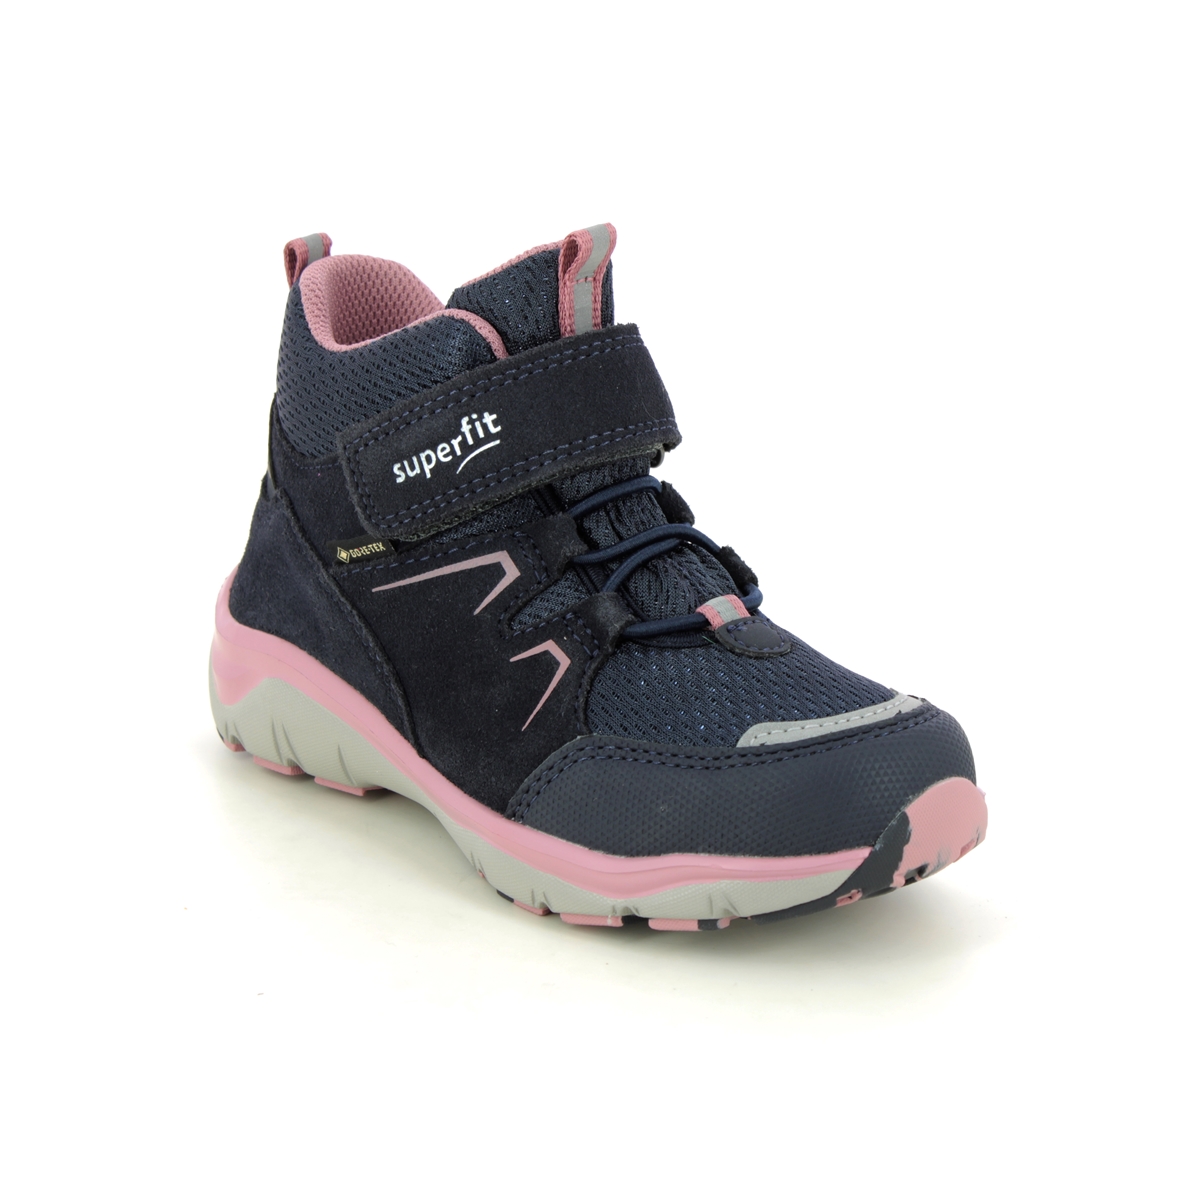 Superfit Sport5 Gore Tex Navy Pink Kids Girls Boots 1000243-8010 In Size 33 In Plain Navy Pink For kids